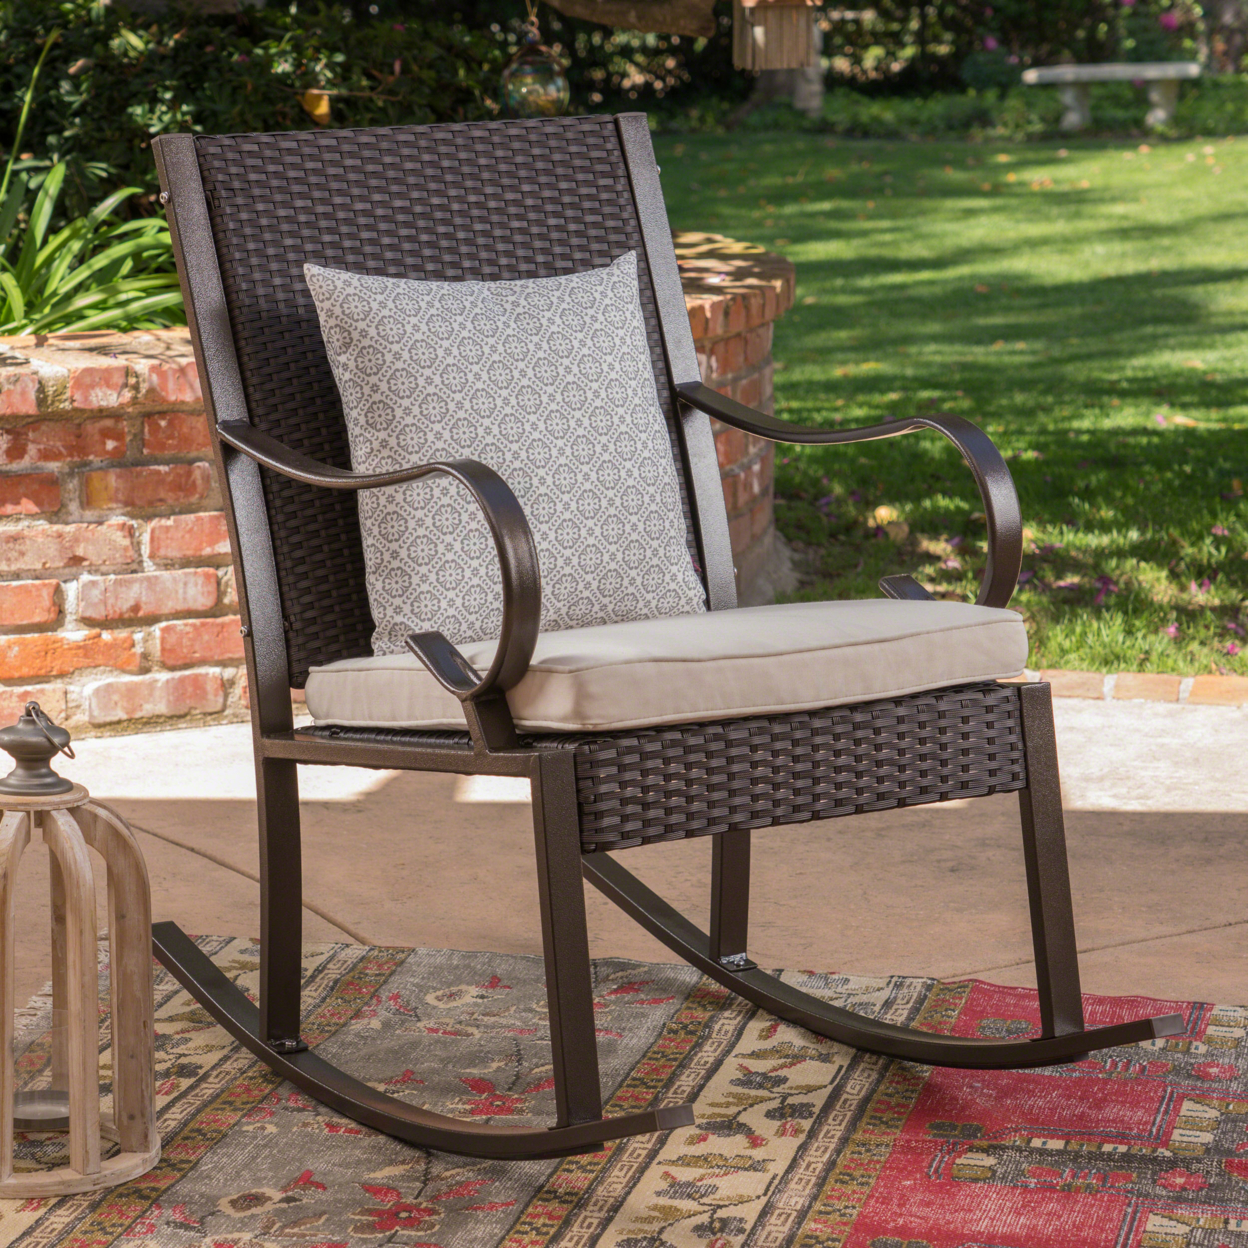 Muriel Outdoor Wicker Rocking Chair With Cushion - Black/White, Set Of 2